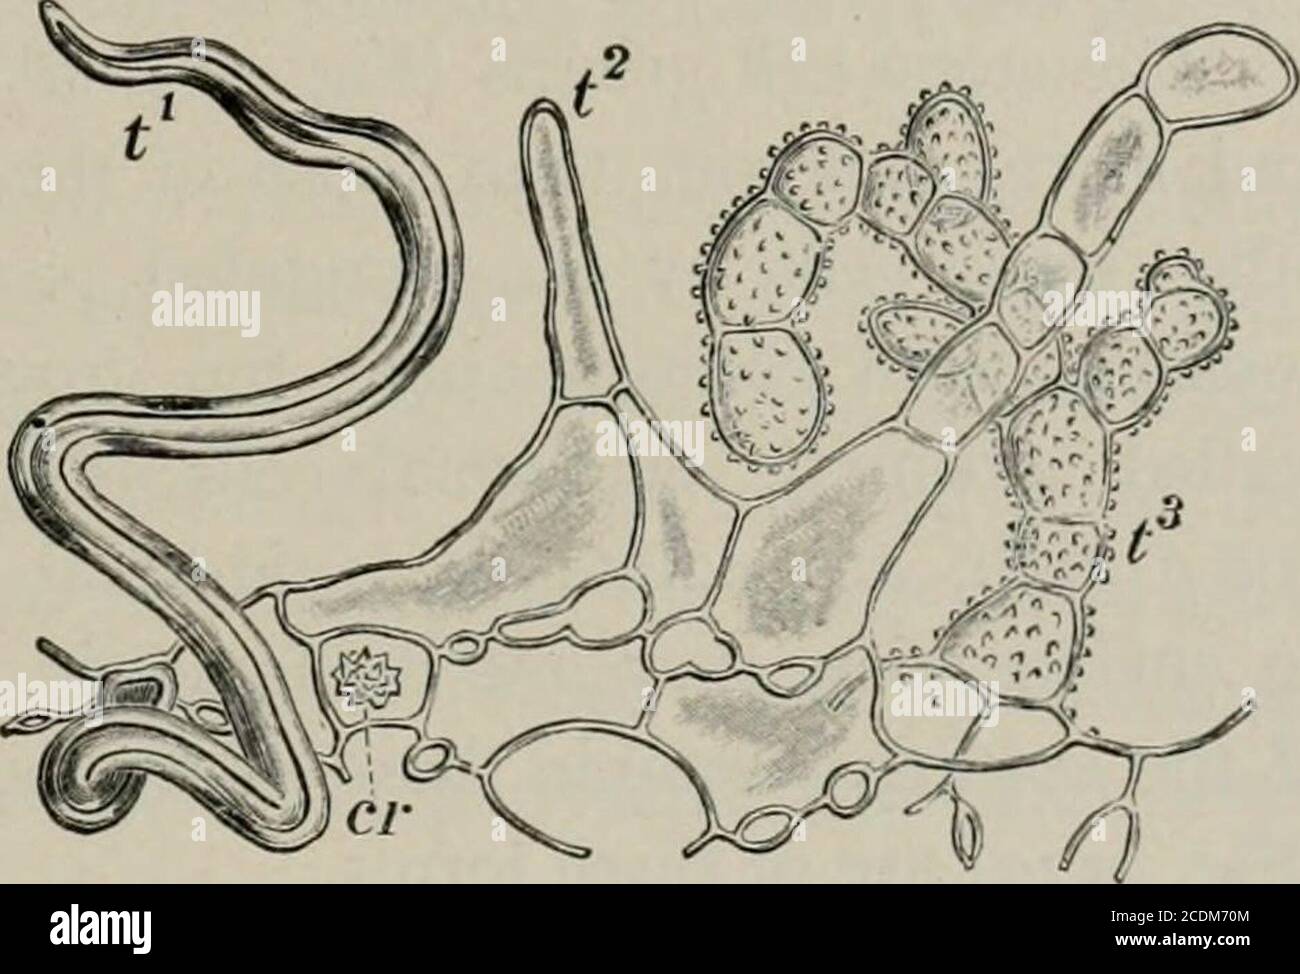 . The microscopy of vegetable foods, with special reference to the detection of adulteration and the diagnosis of mixtures . cell group, with /&gt; radiatingparenchyma containing am starch grains, p^ irregularly thickened parenchyma, /fiber, bundle consisting of sp spiral, g pitted and rd reticulated vessels, st- stone cellsaccompanying bundle, /» spongy parenchyma and cr crystal ceil of inner mesocarp;/&gt;* and p^ parenchyma and ie inner layer of endocarp. X160. (K. B. Winton.) off by handling. The fruit has five cavities, like the apple and pear,but each contains 6-15 seeds arranged mostly Stock Photo